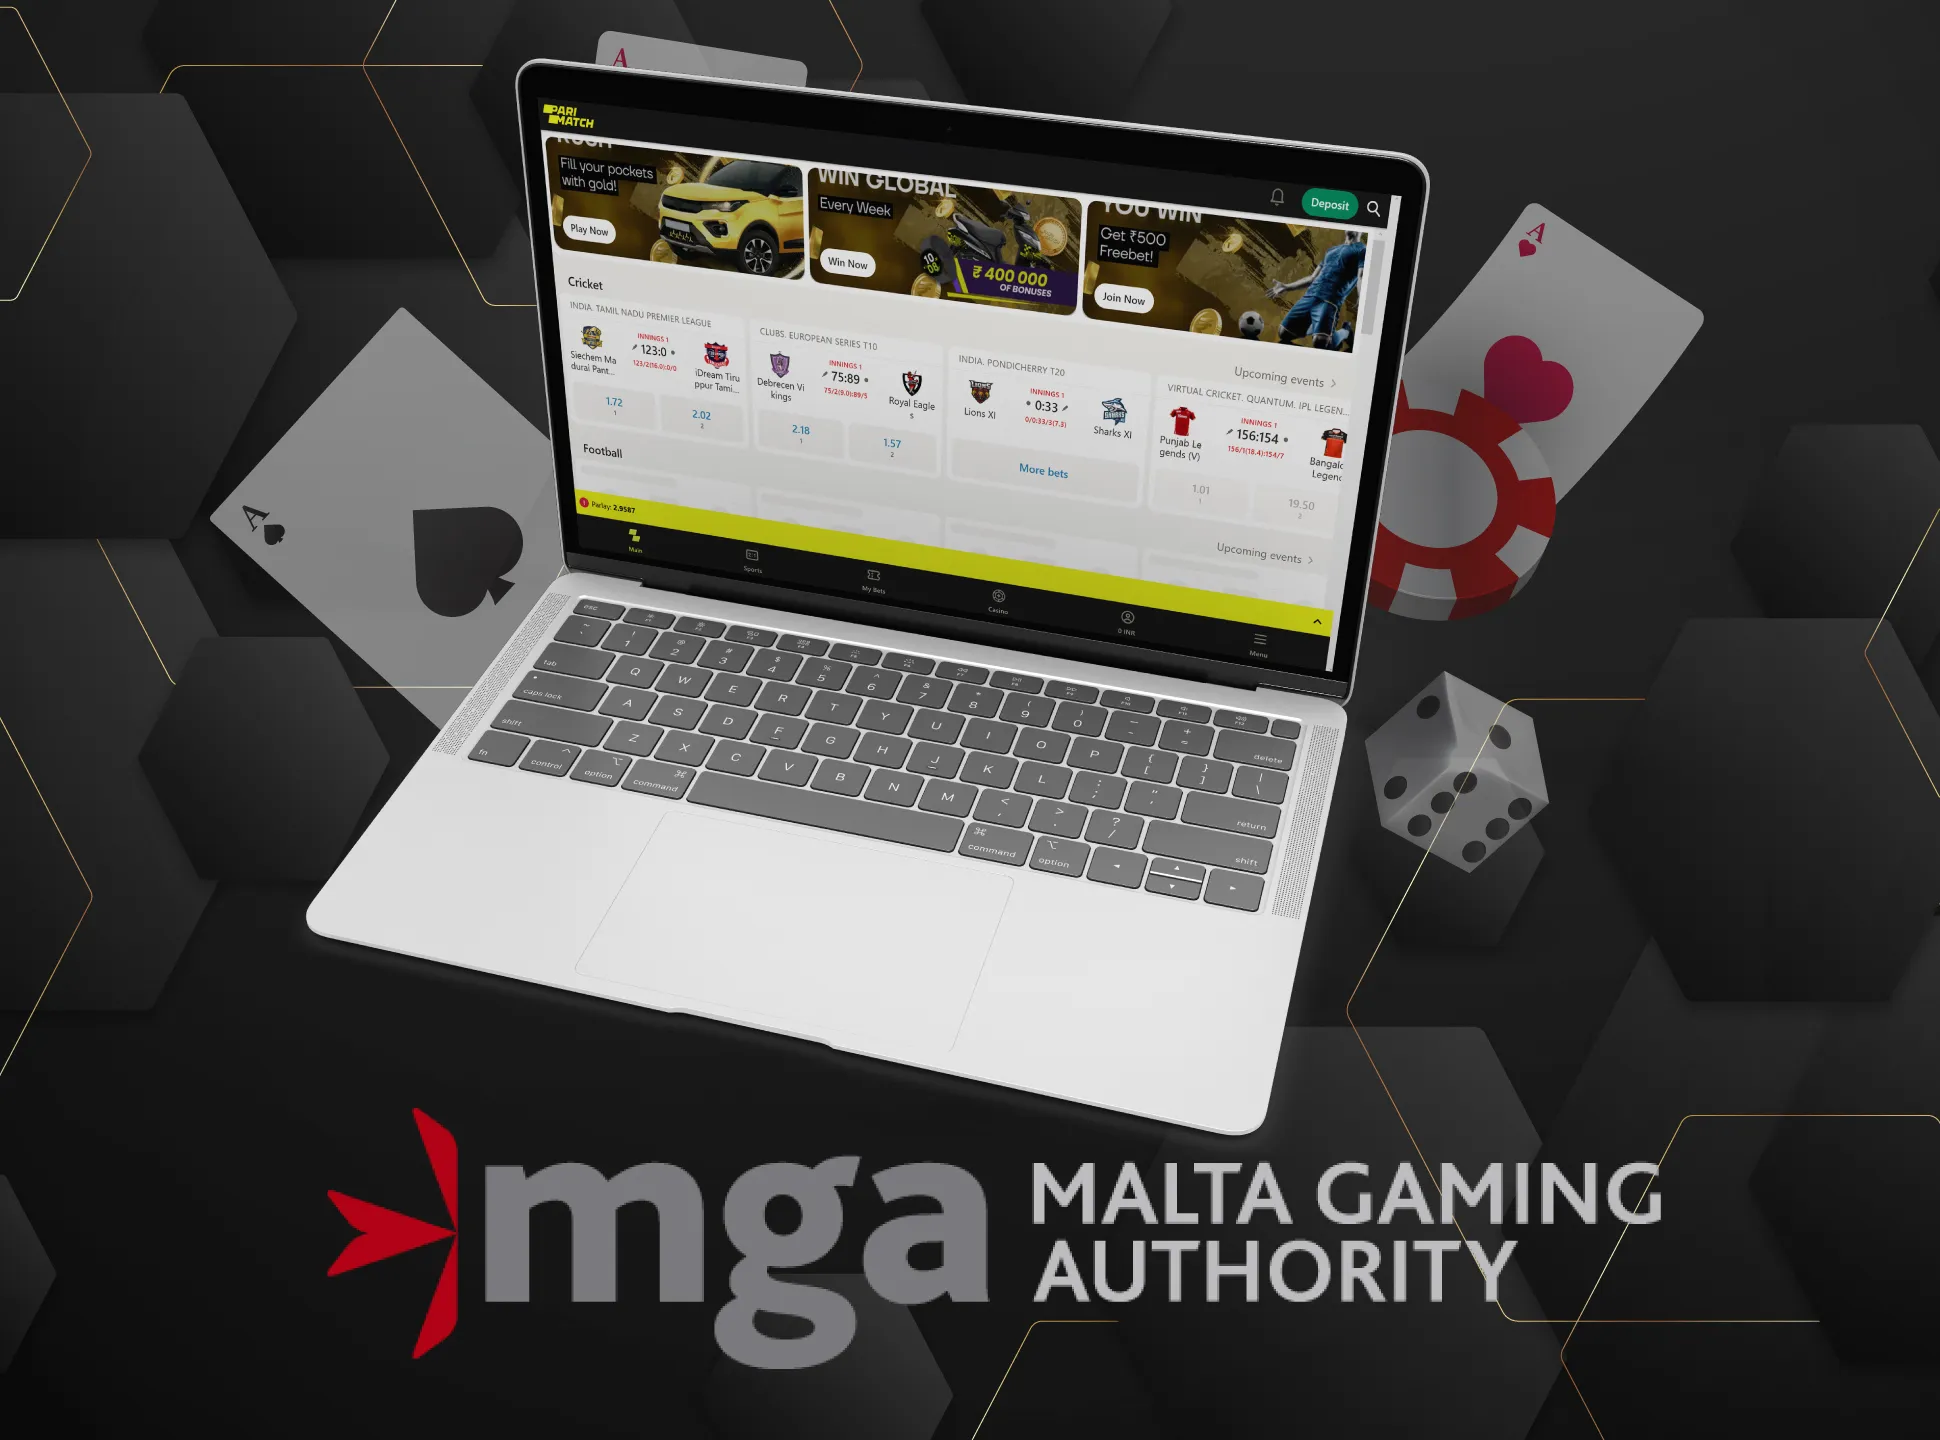 Malta Gaming Authority regulates casinos, bookmakers and lotteries.